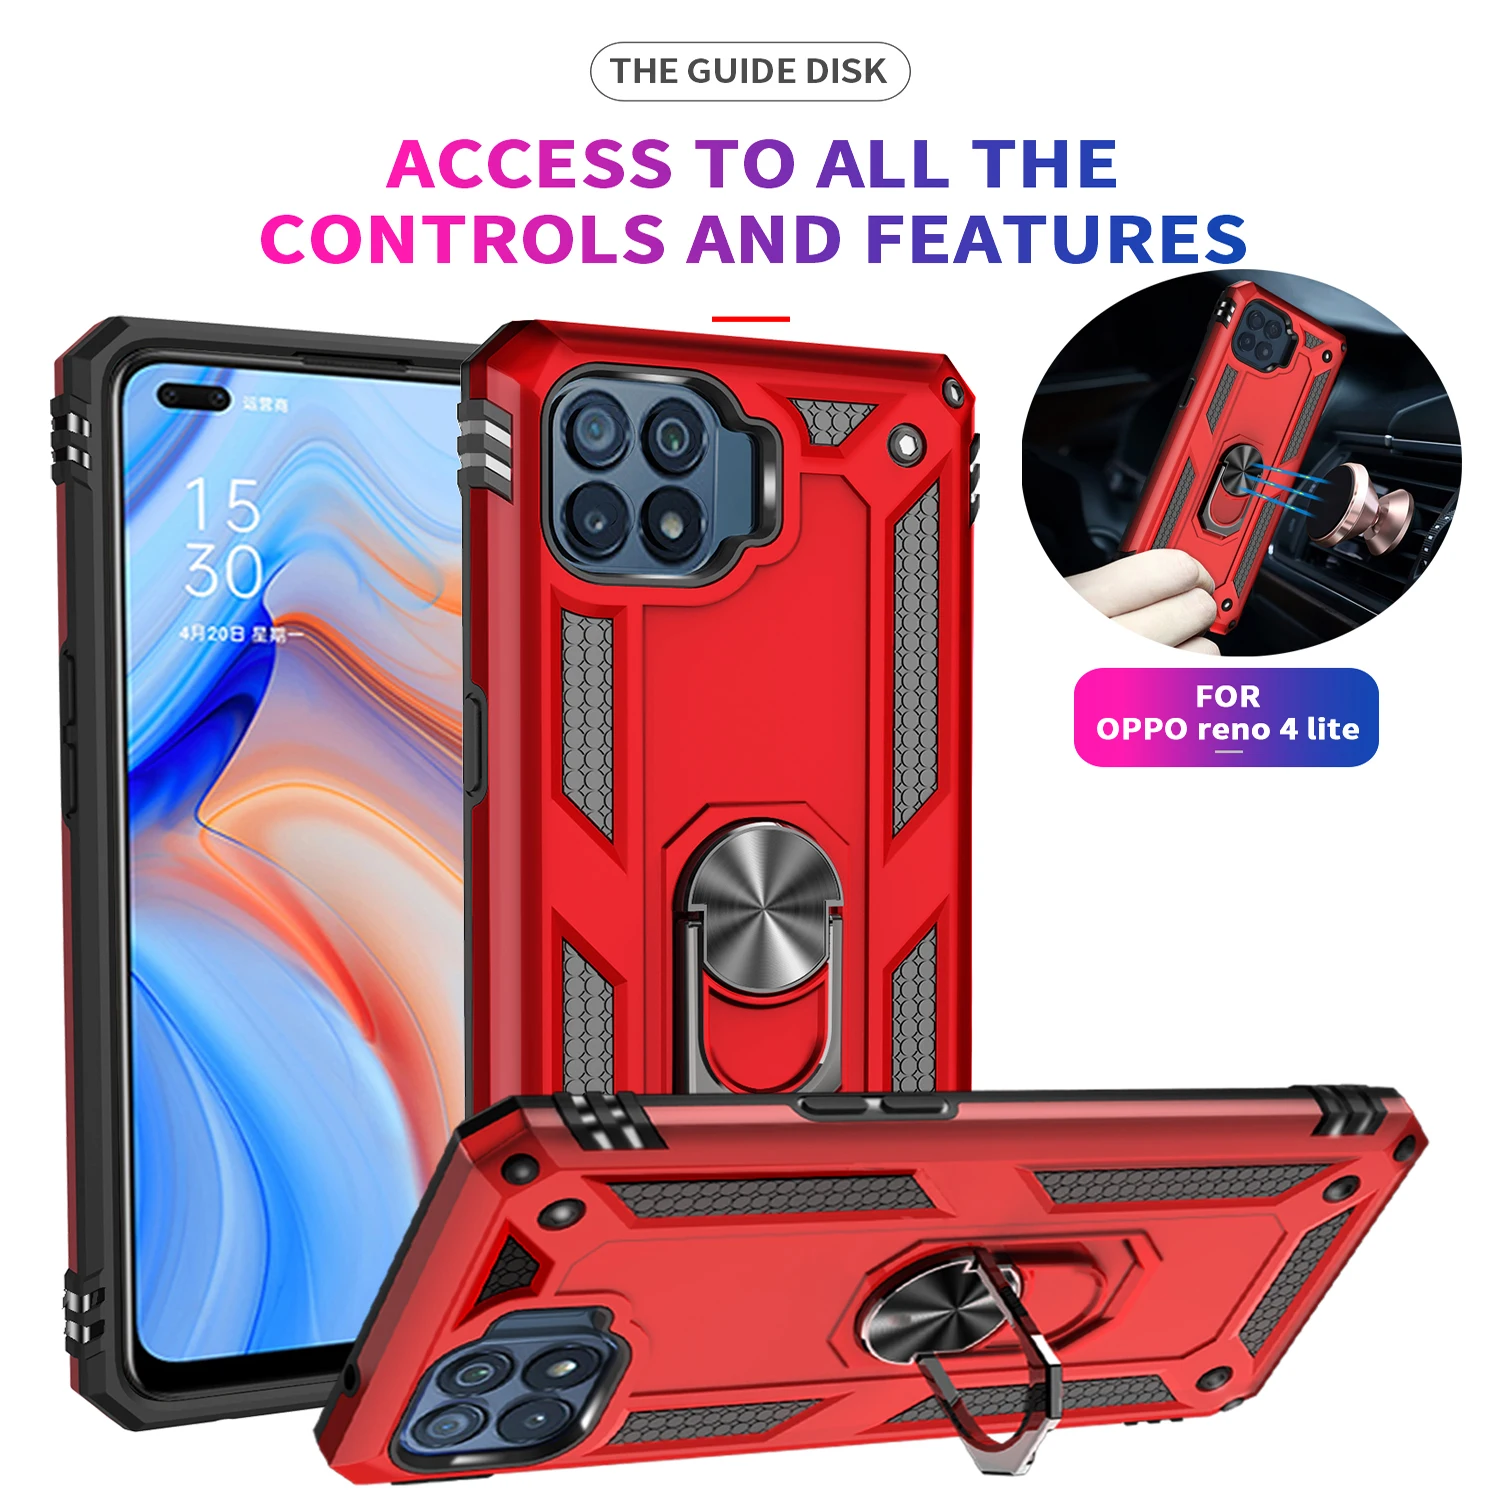 For OPPO Reno 4 Lite 4F Case Shockproof Armor Magnetic Metal Ring Cover For OPPO F11 F17 Pro A93 A3S A5S A5 A7 Bumper Cases Capa a cases for oppo phones